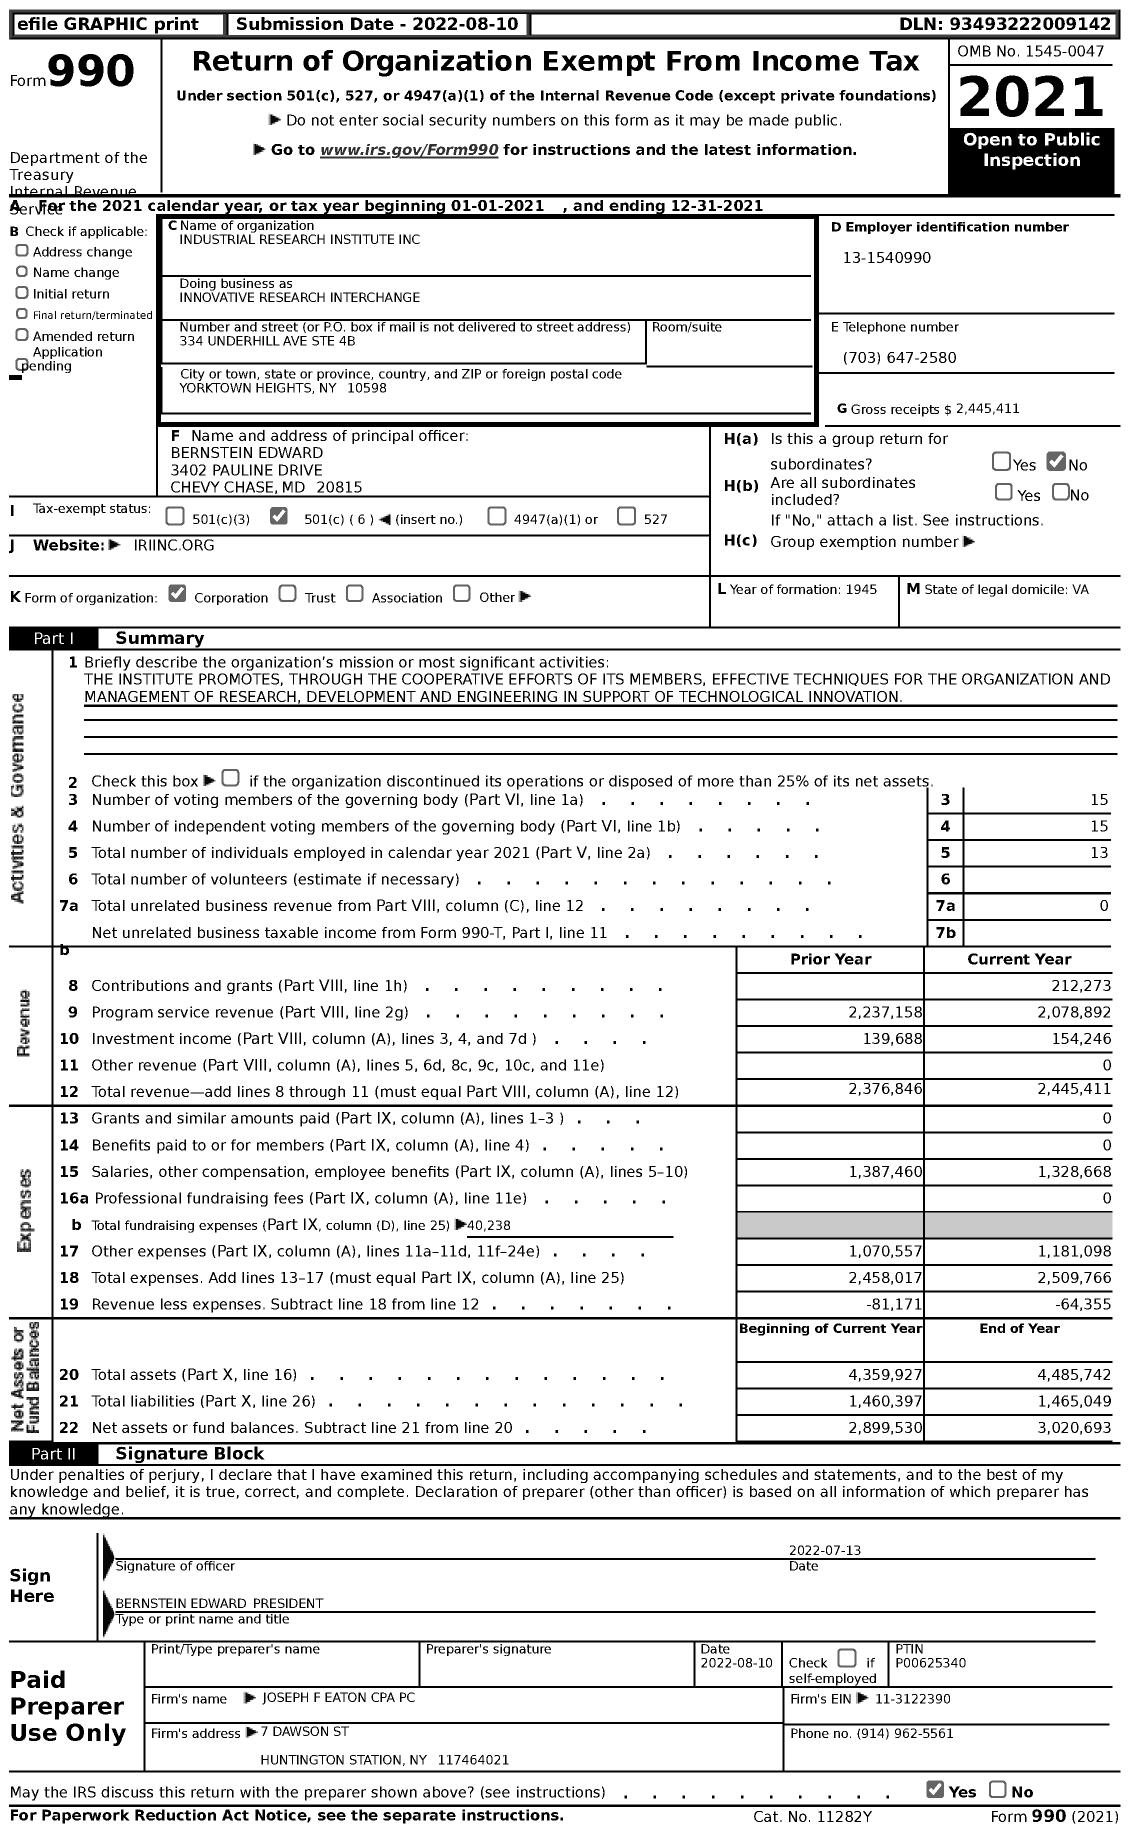 Image of first page of 2021 Form 990 for Innovative Research Interchange (IRI)